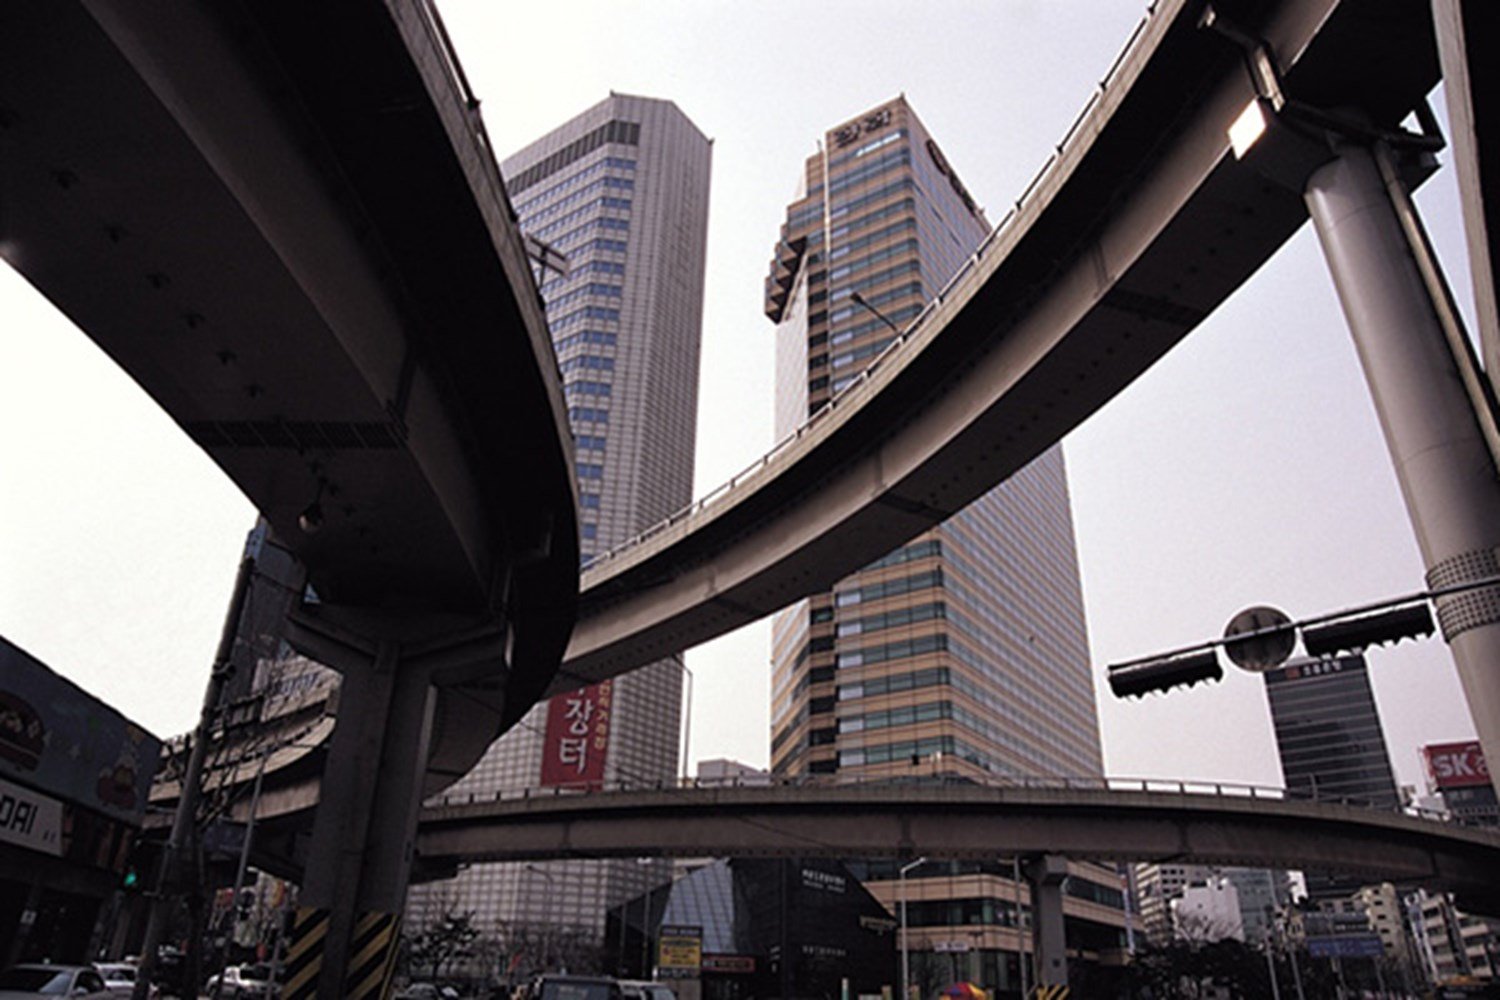 Looking up at highway overpasses and high-rise buildings